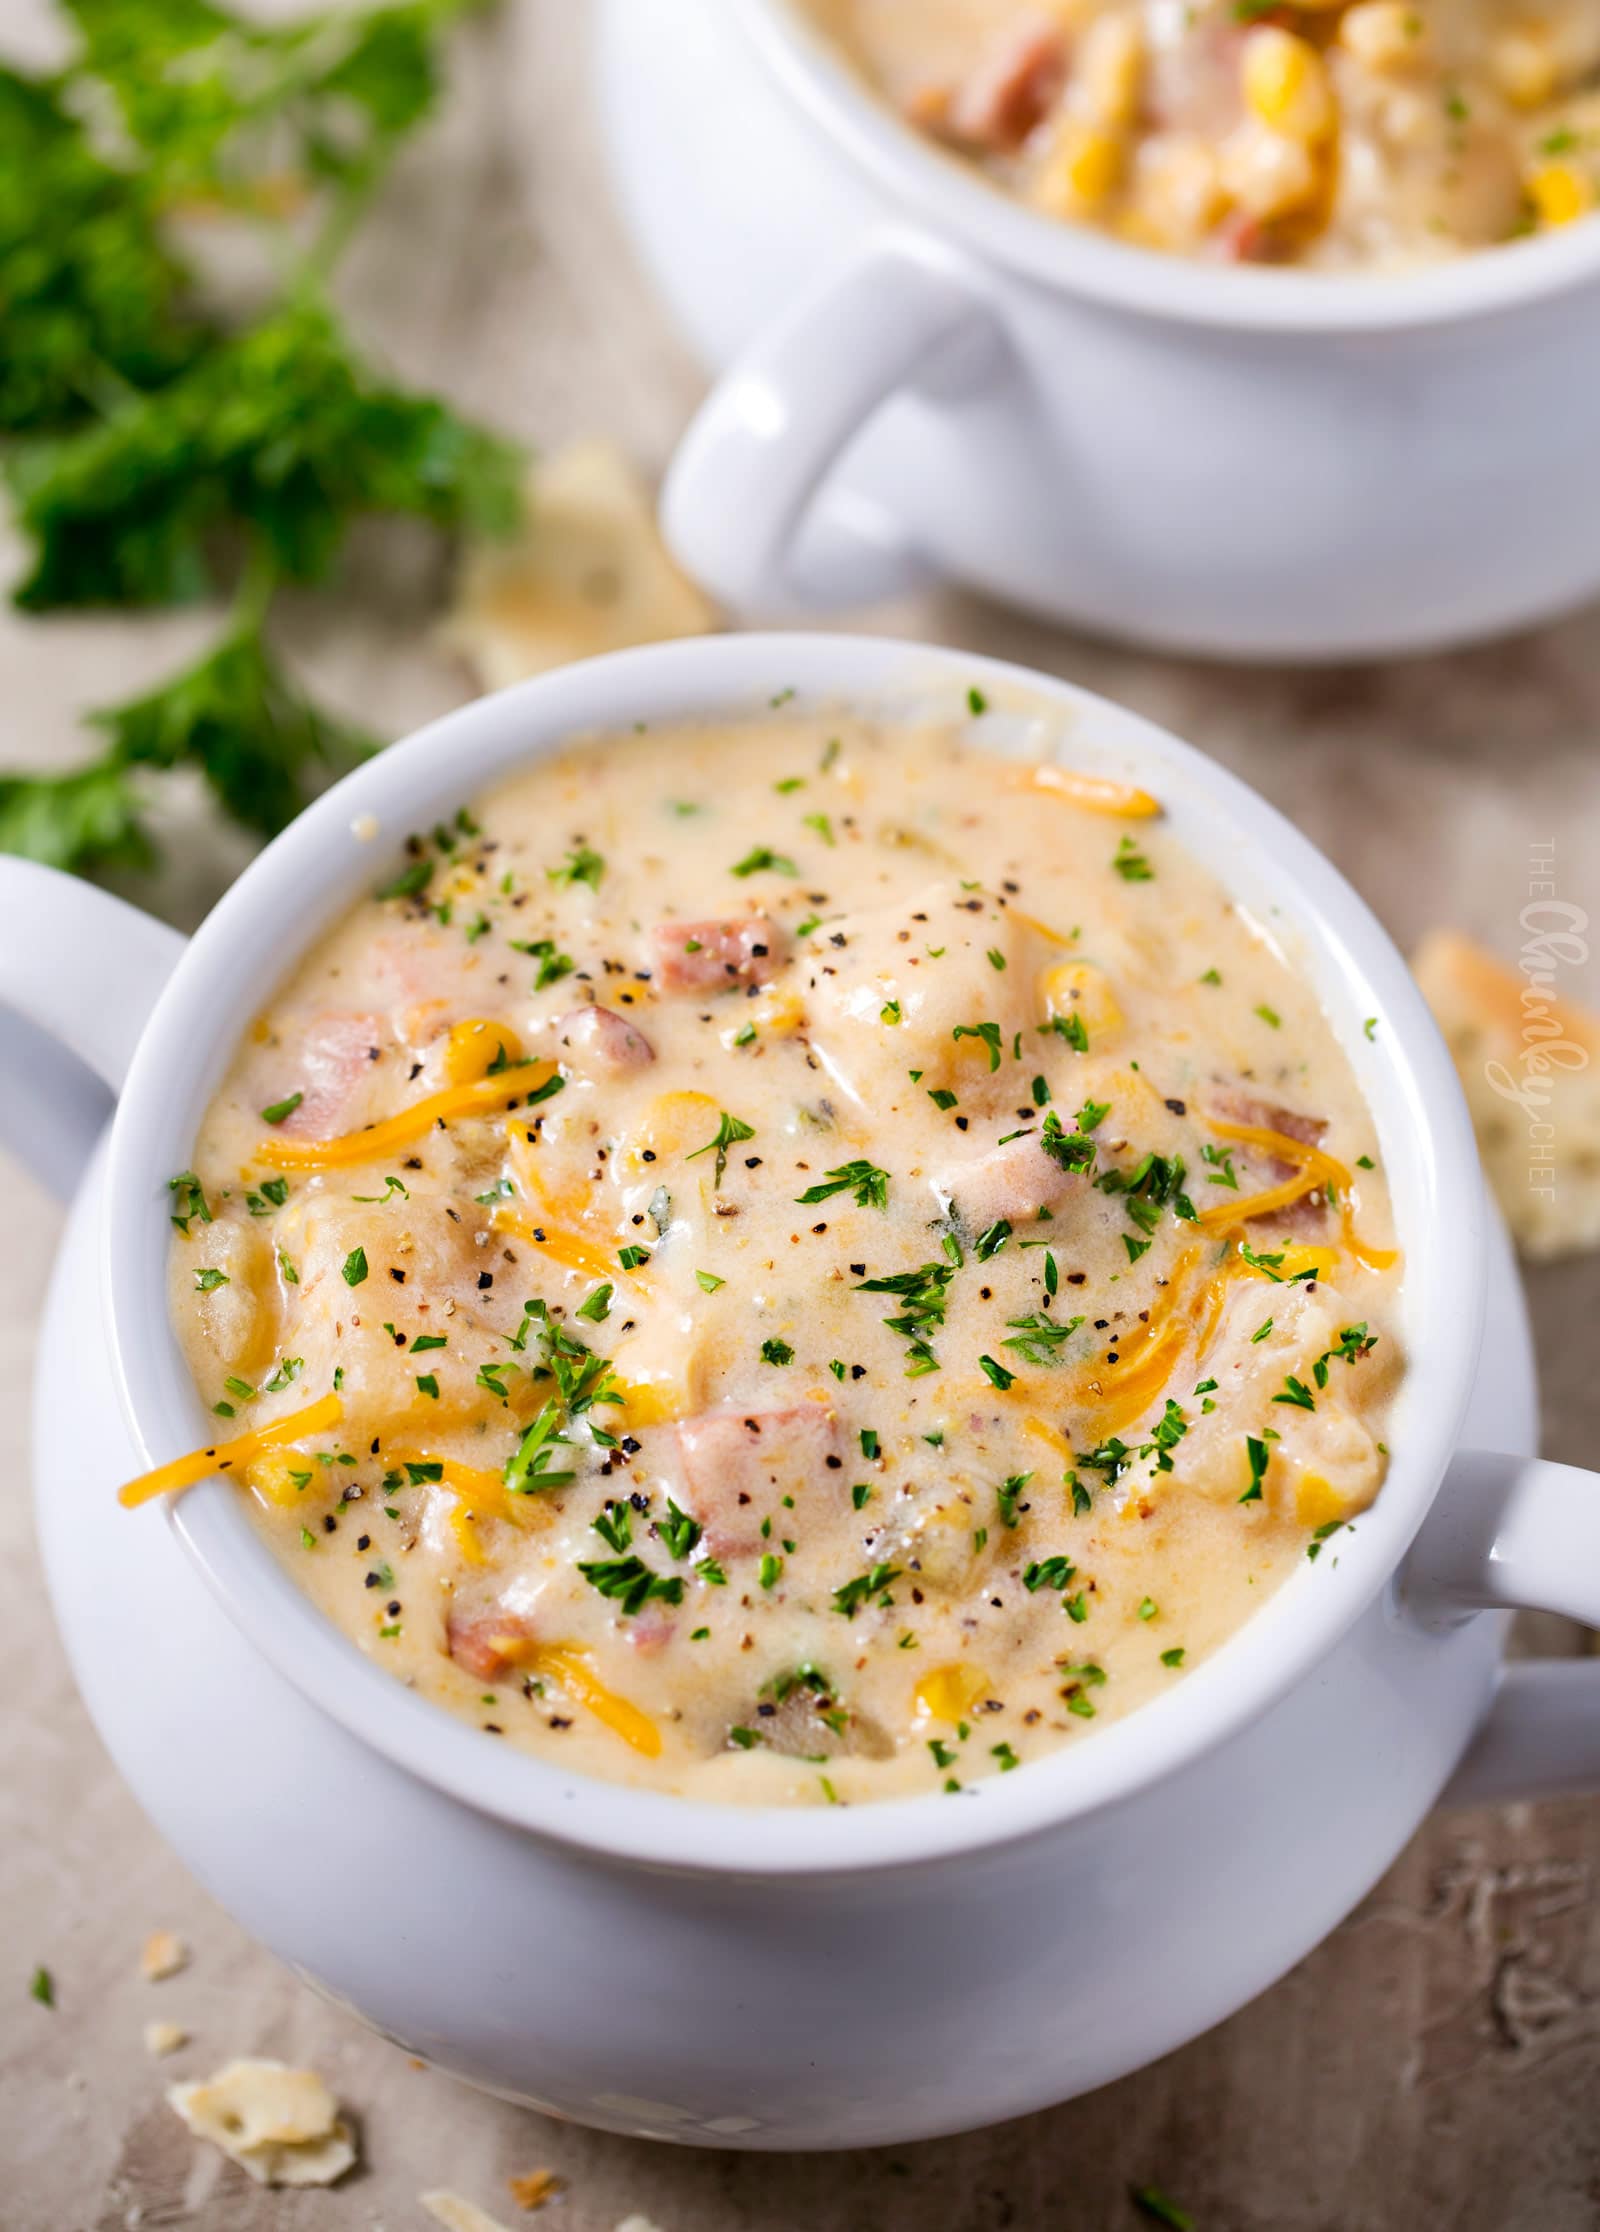 Slow Cooker Cheesy Ham Chowder | Creamy, cheesy and hearty, this slow cooker ham chowder is the perfect way to use up any leftover ham!  Perfect for a busy weeknight meal! | https://www.thechunkychef.com | #chowder #soup #ham #leftover #slowcooker #crockpot